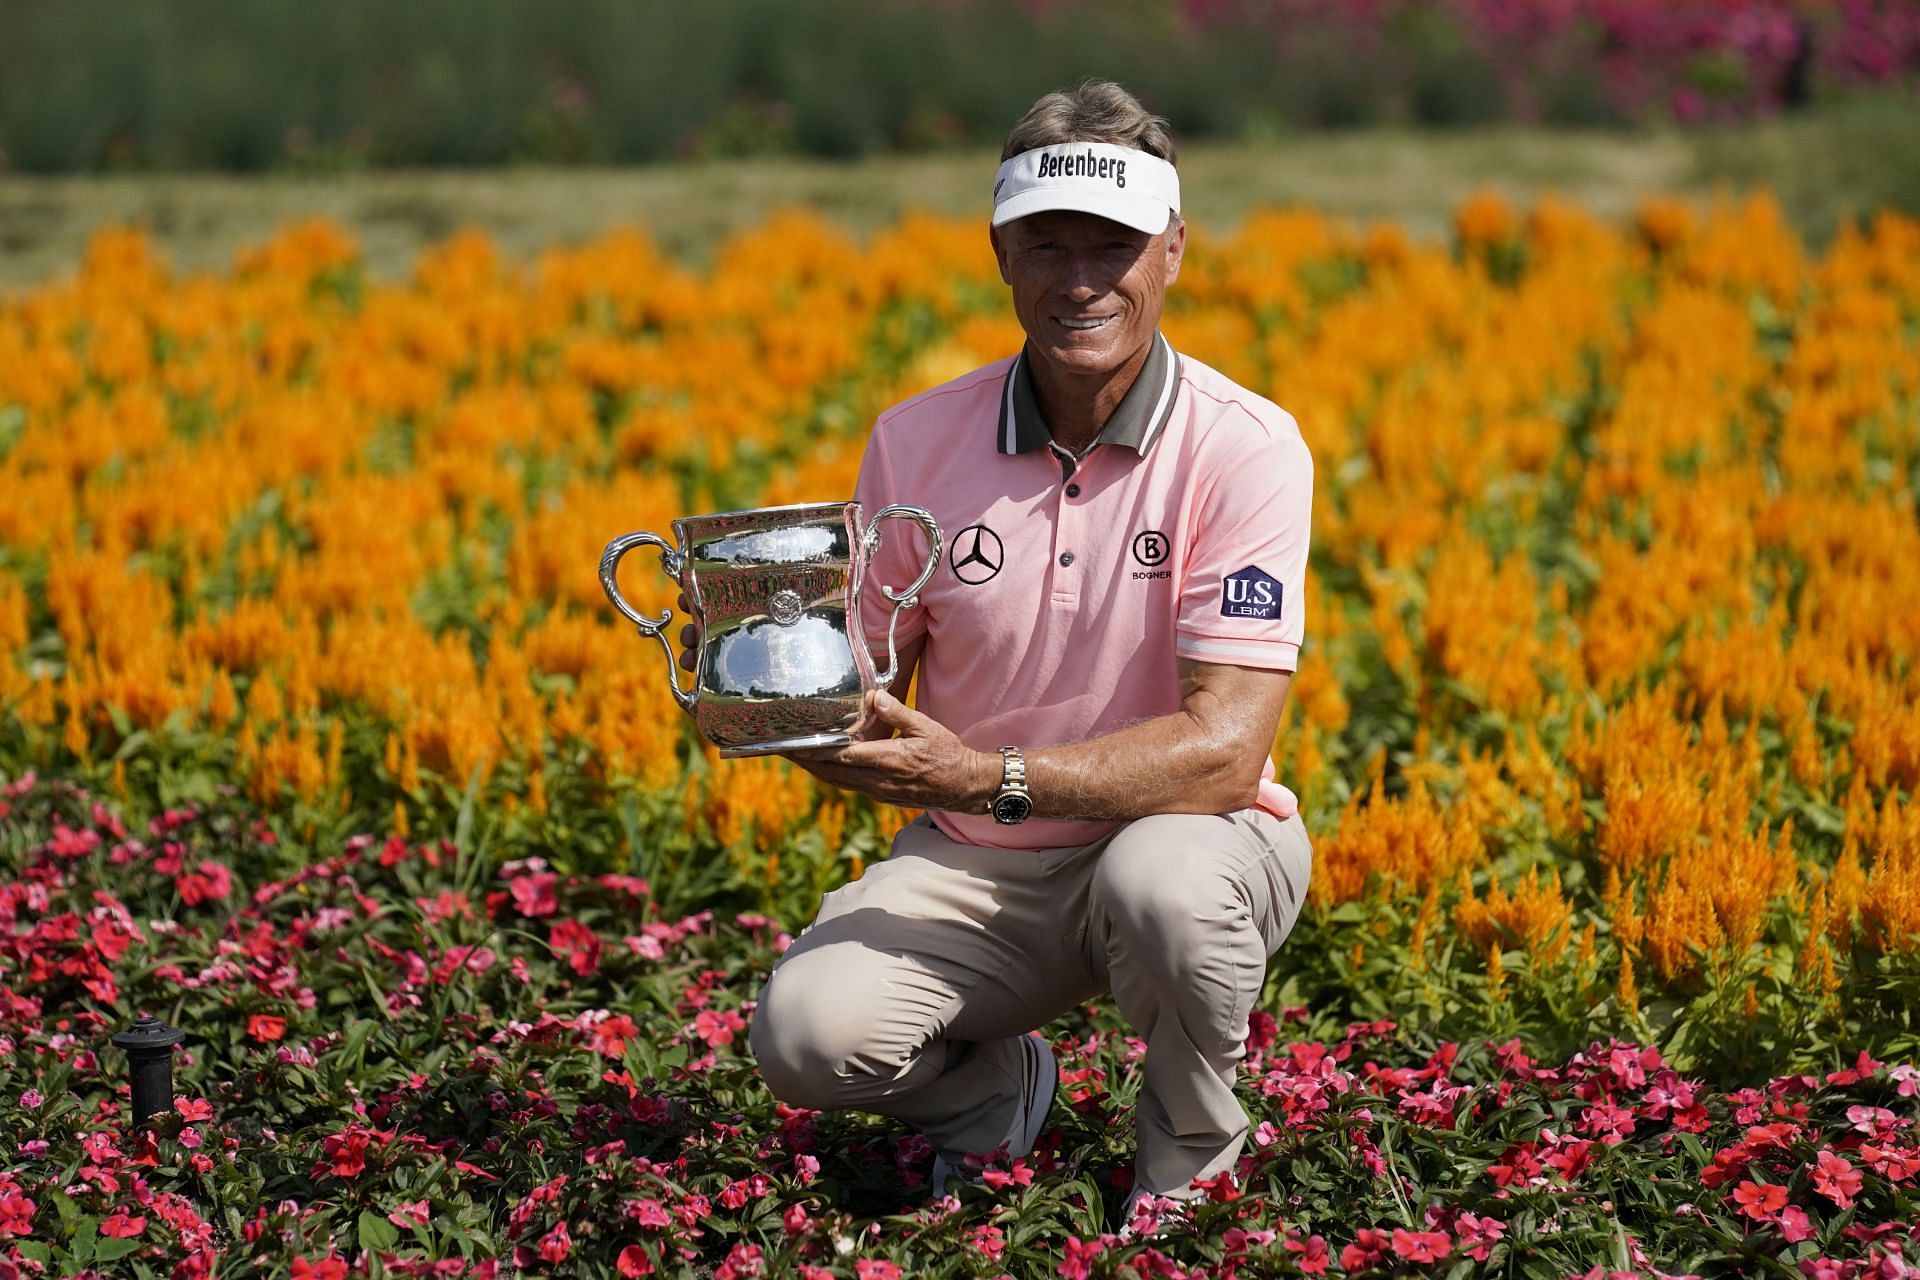 How much did Bernhard Langer win at the 2023 US Senior Open? Final